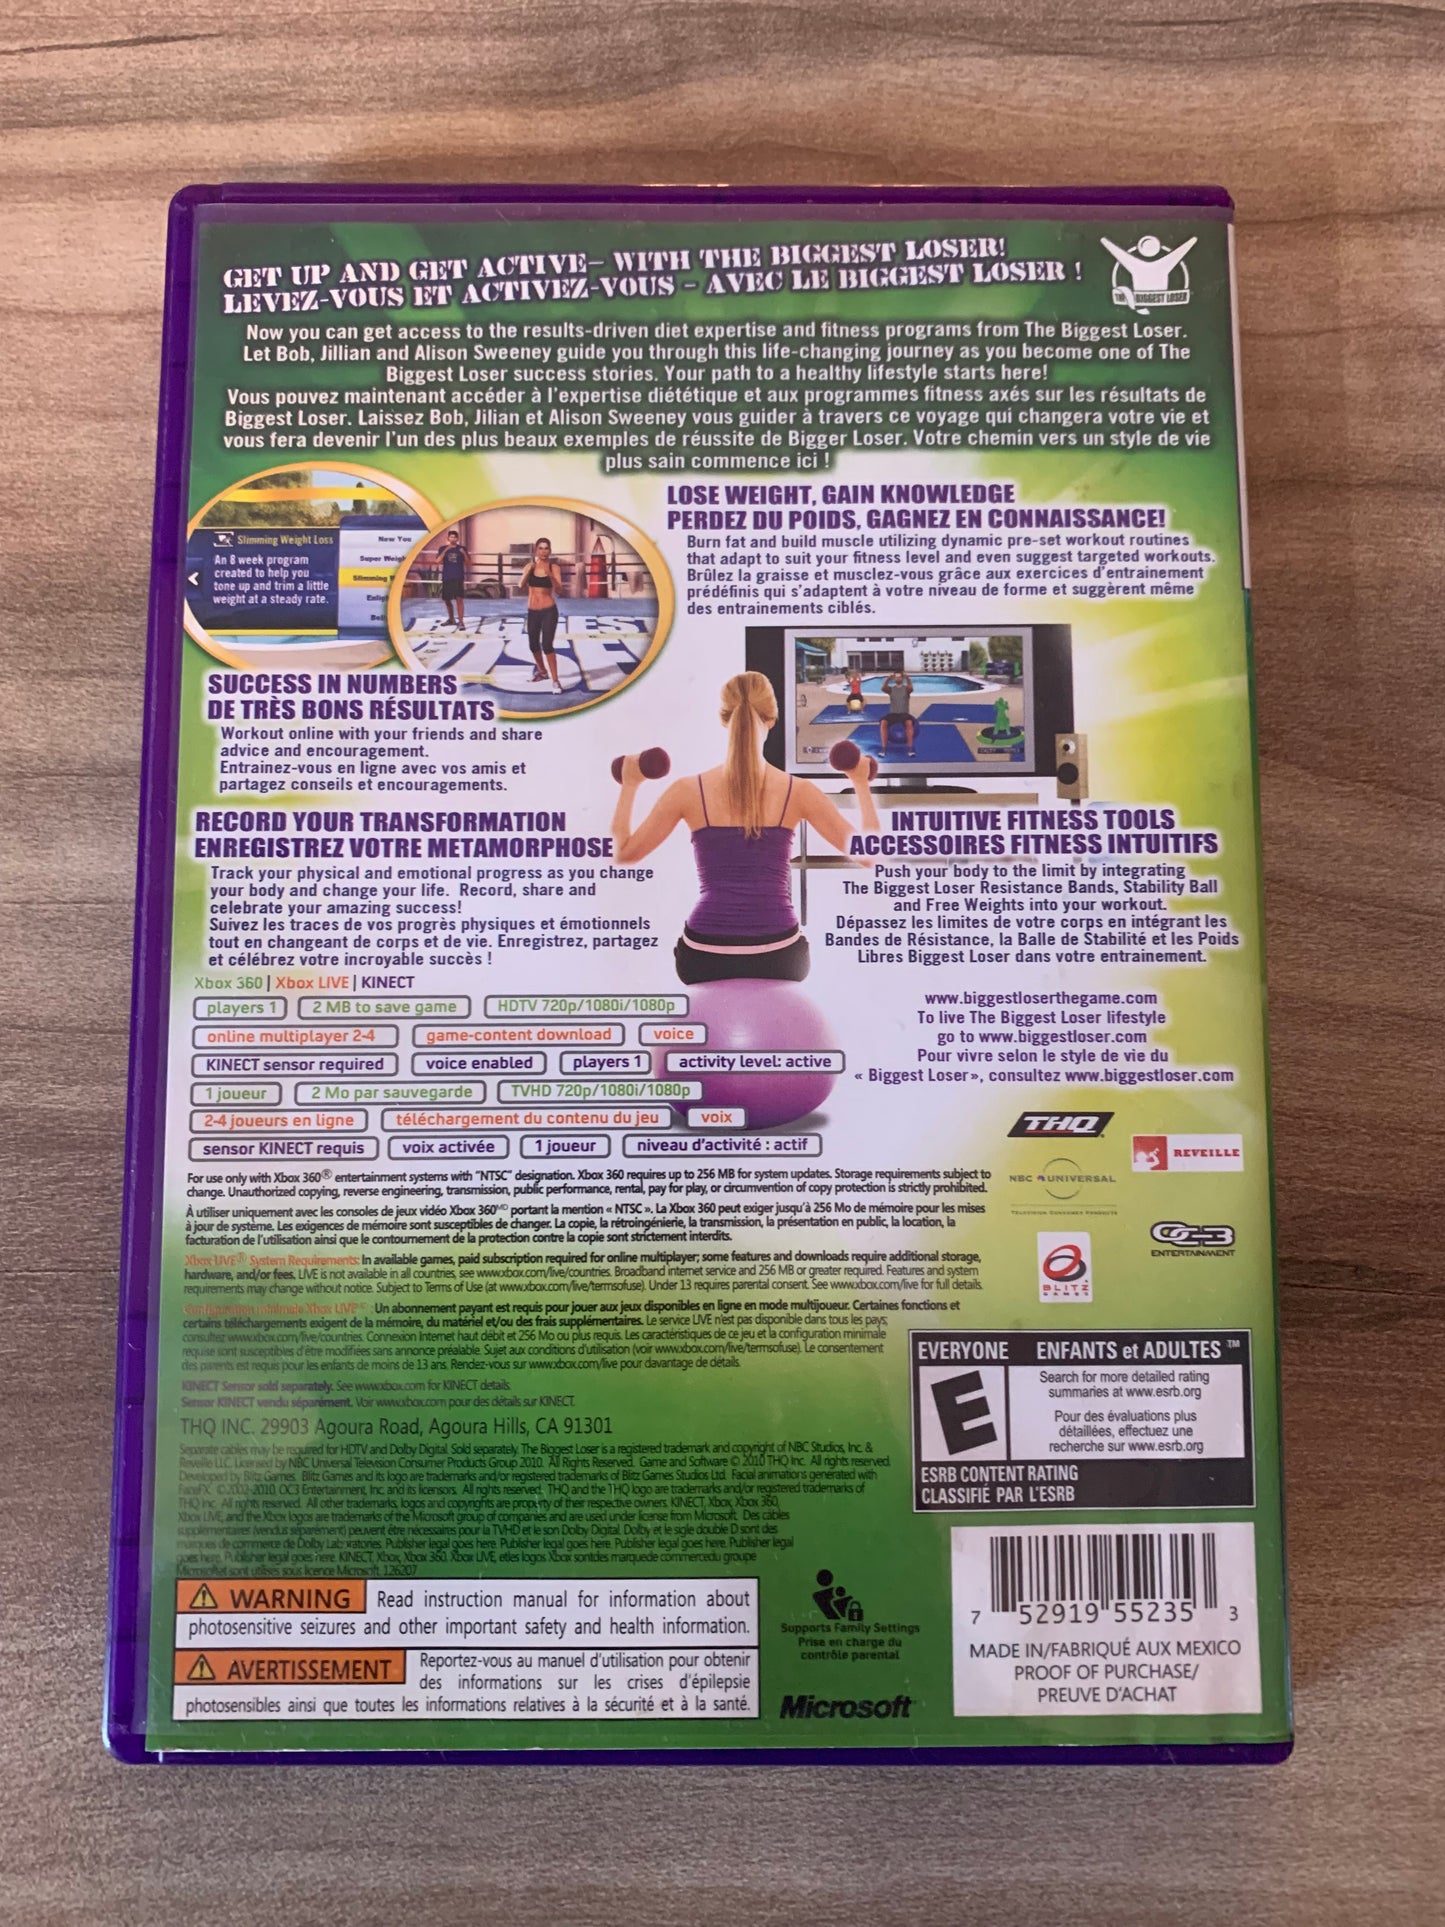 MiCROSOFT XBOX 360 | THE BiGGEST LOSER ULTiMATE WORKOUT